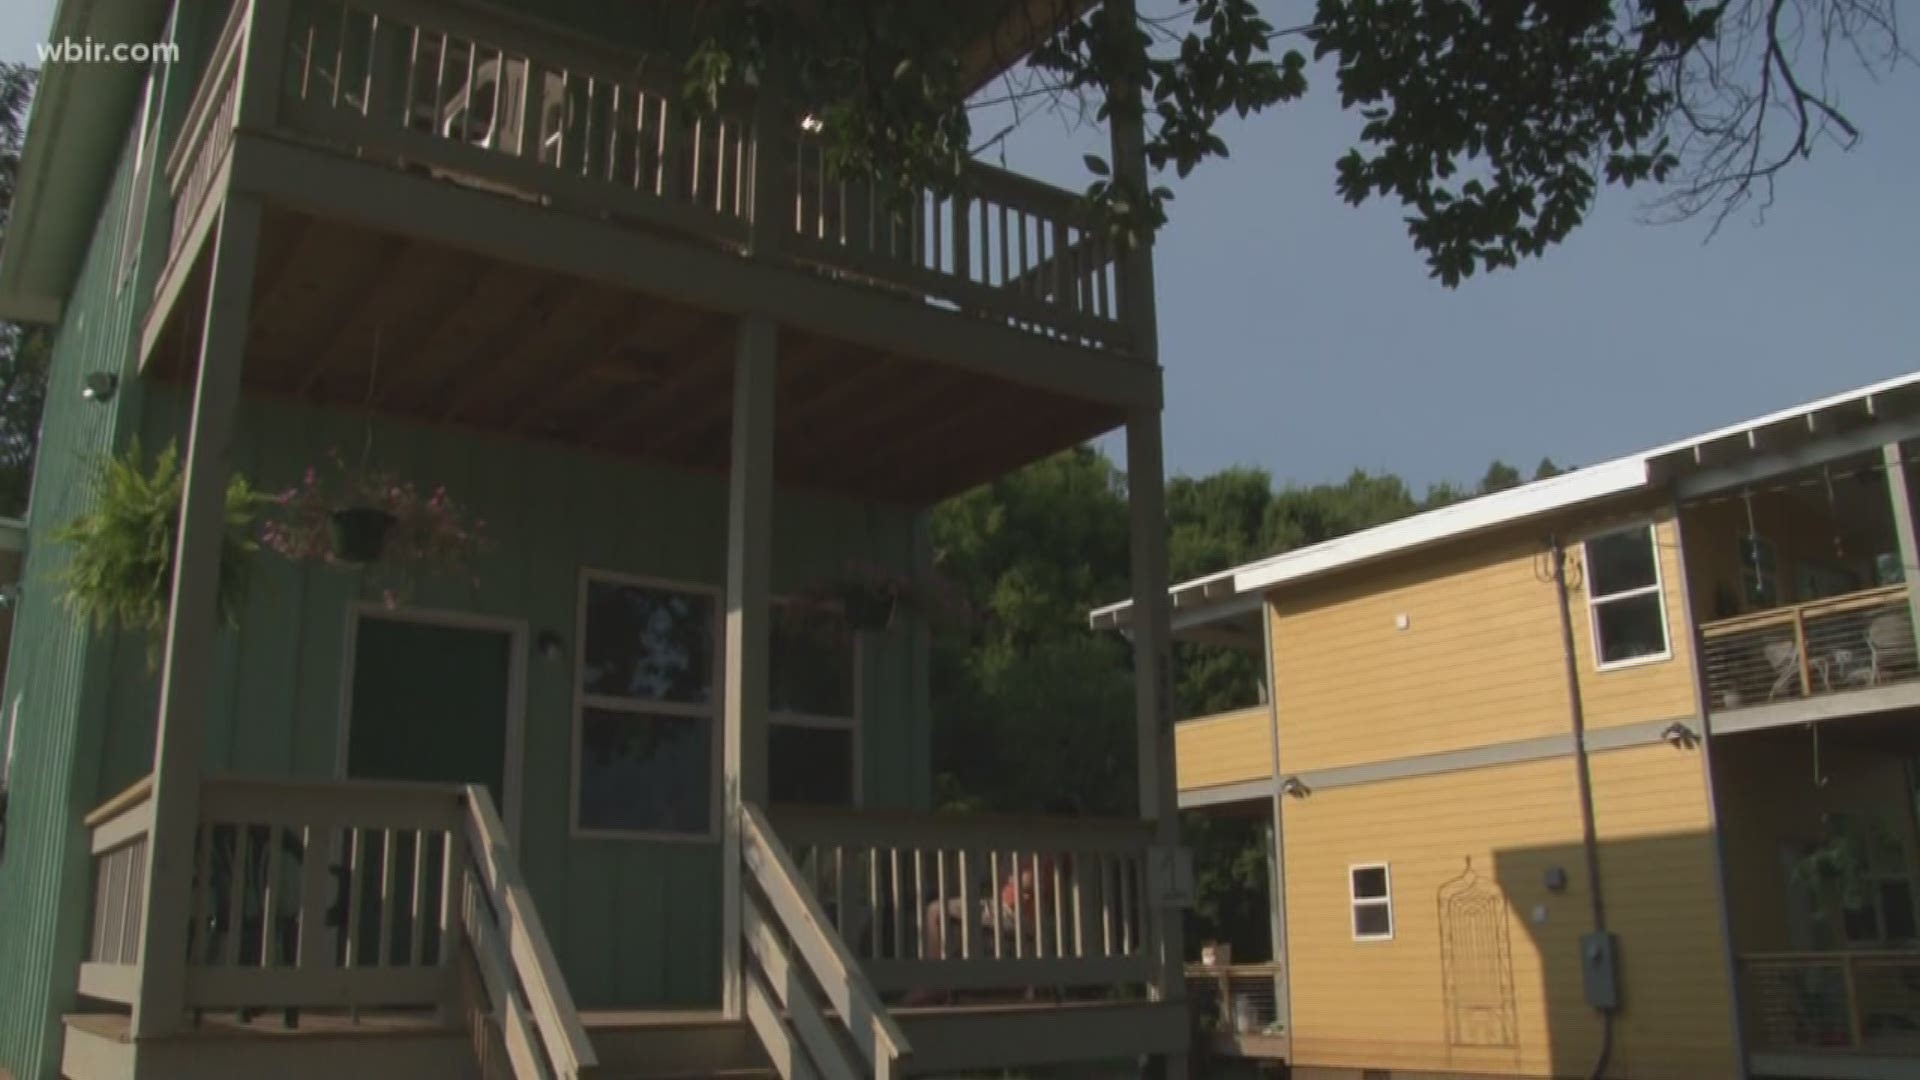 The Tiny Home craze has finally made its way to Knoxville... and you could own yours soon